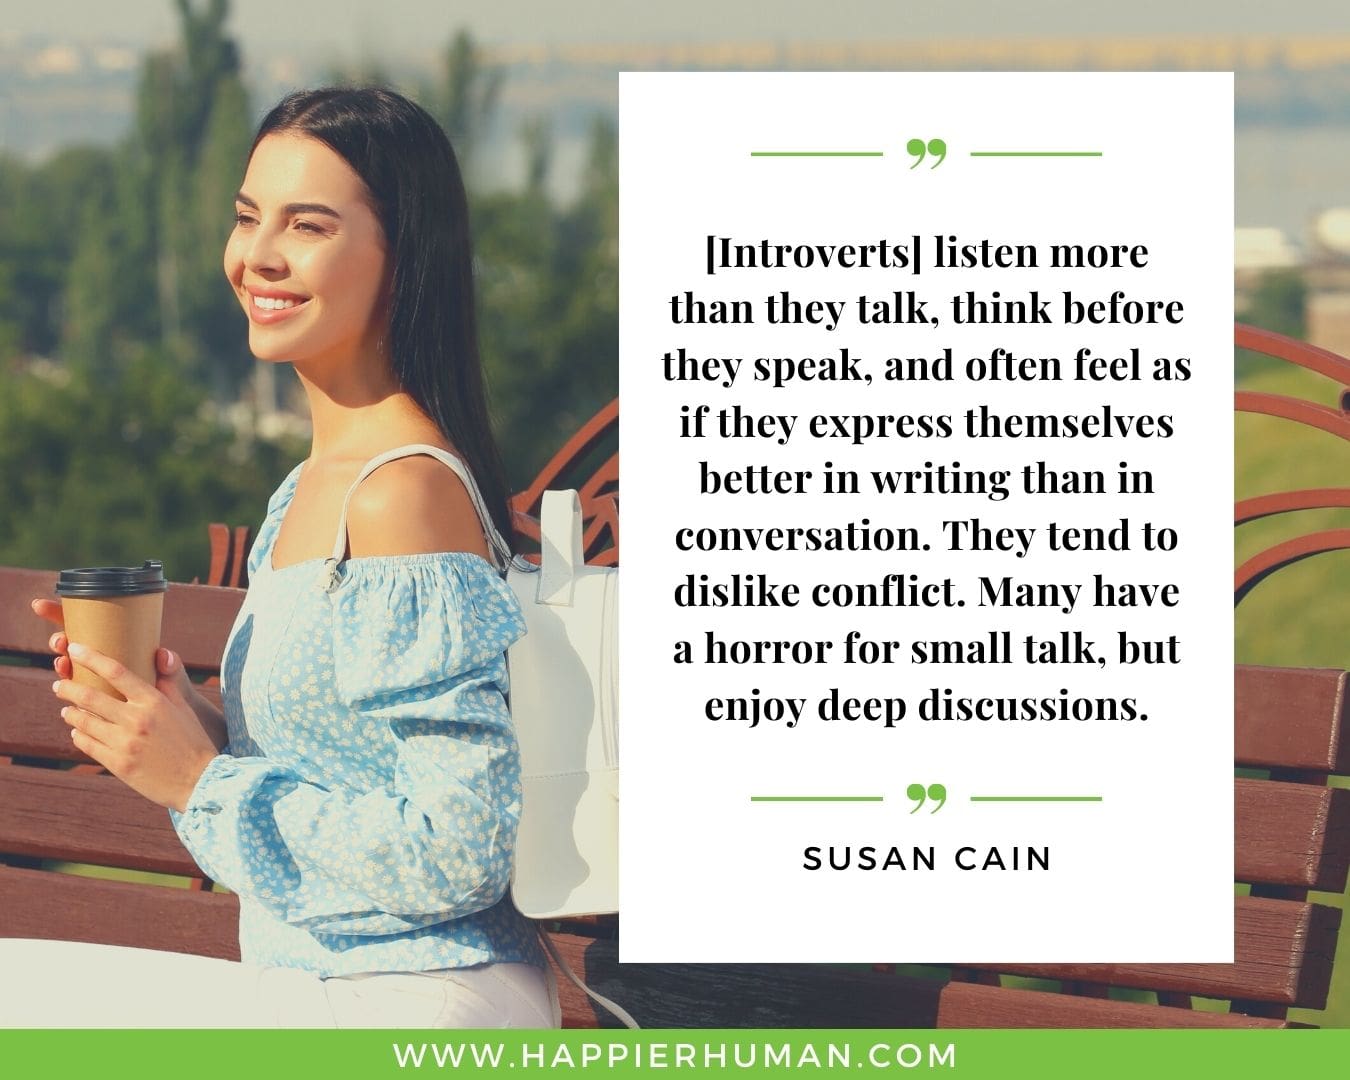 Introvert Quotes - “[Introverts] listen more than they talk, think before they speak, and often feel as if they express themselves better in writing than in conversation. They tend to dislike conflict. Many have a horror for small talk, but enjoy deep discussions.” – Susan Cain